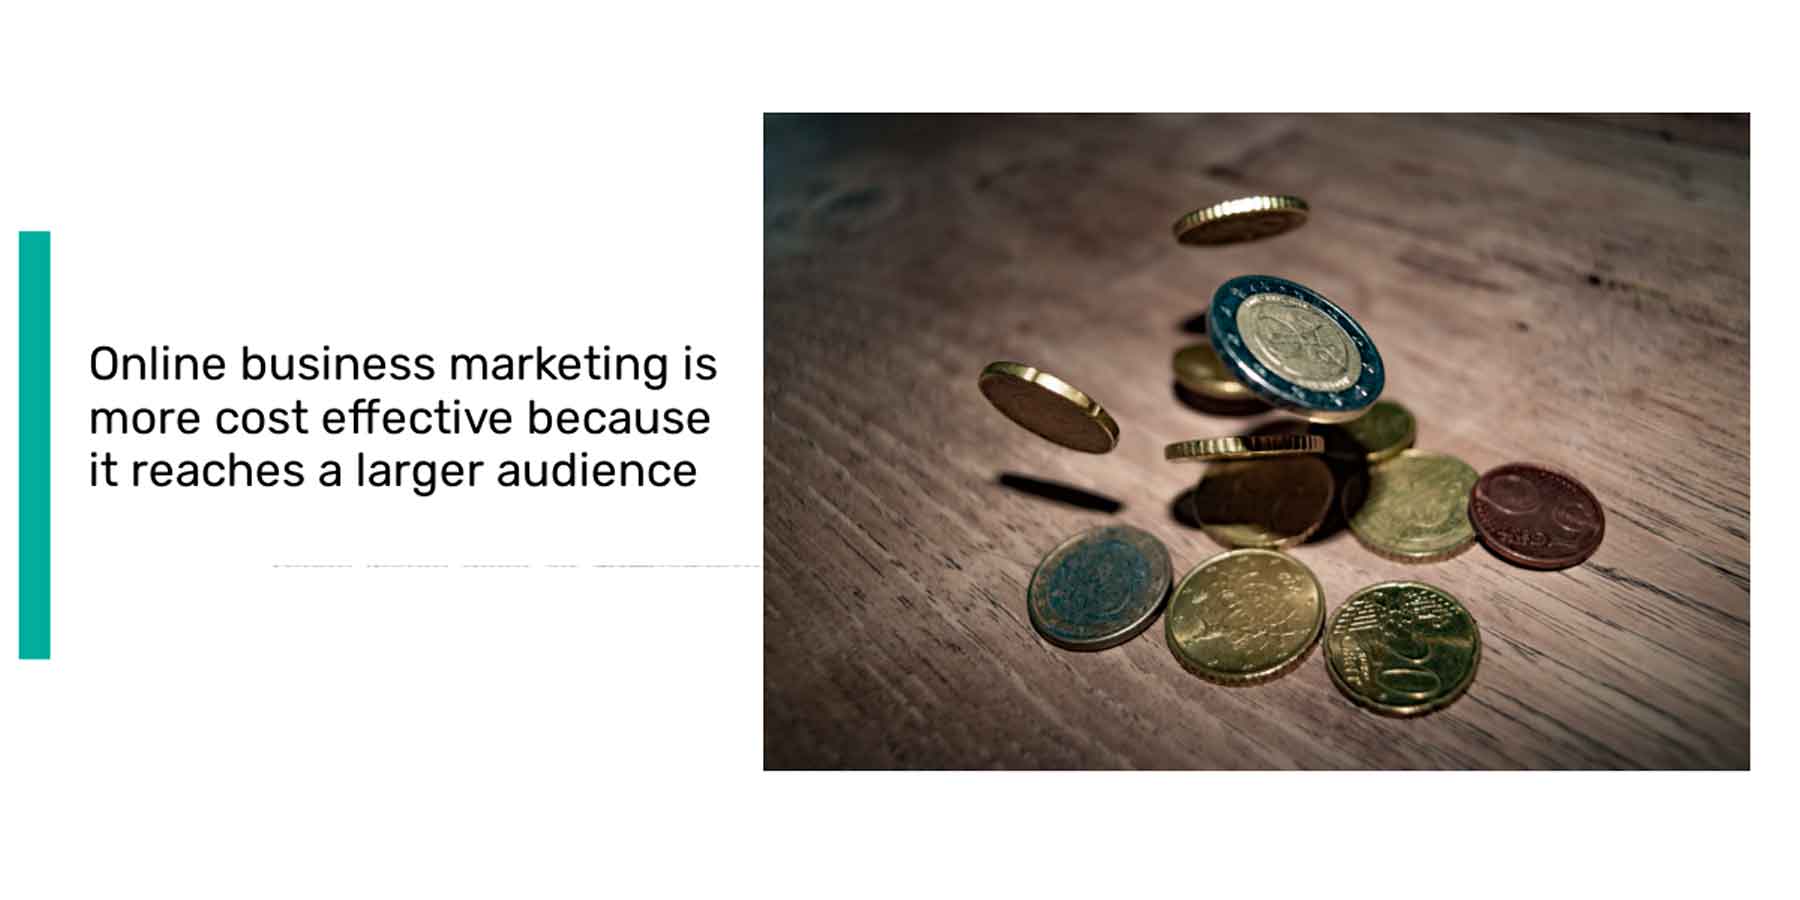 Online business marketing is more cost effective because it reaches a larger audience 